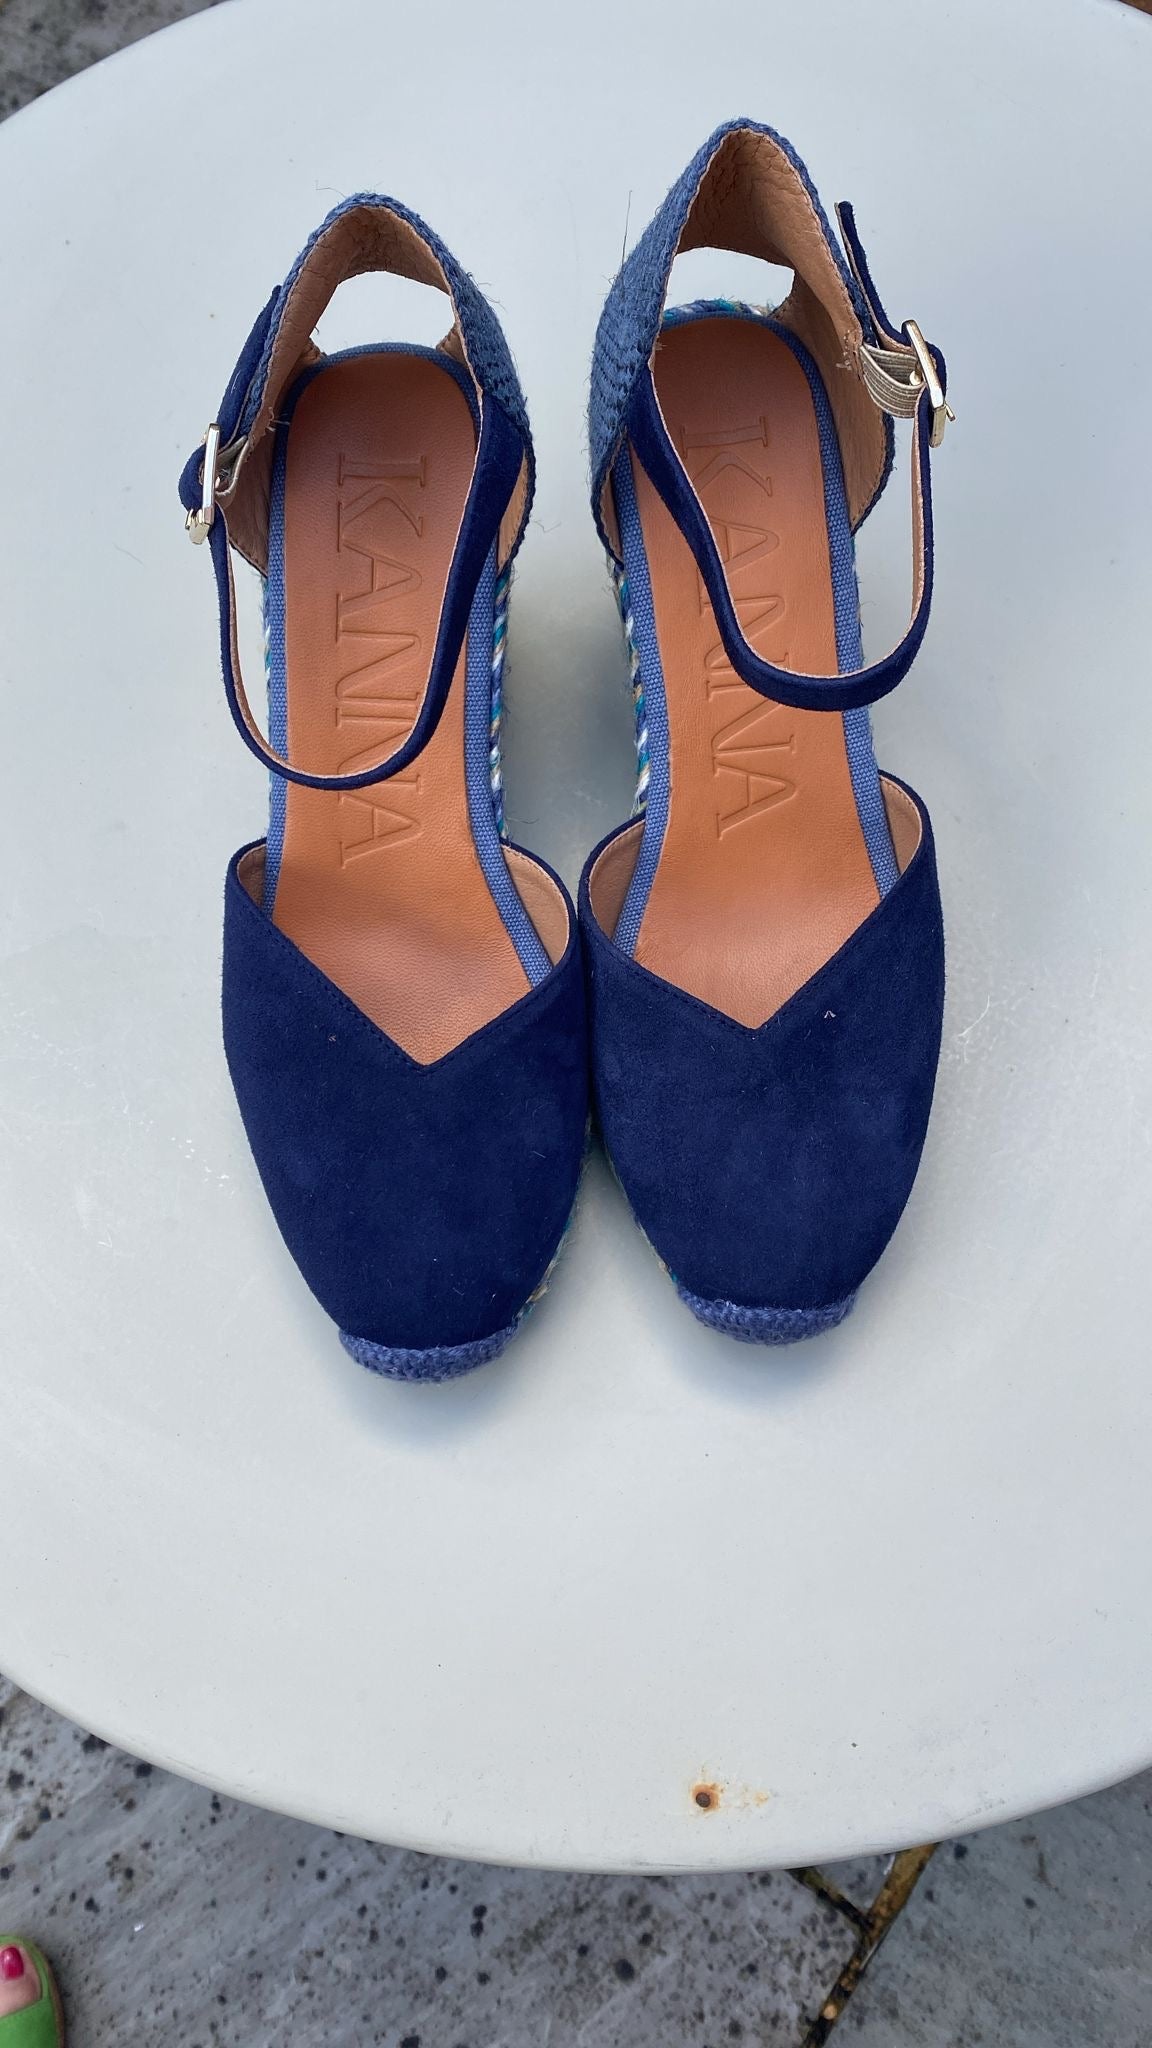 Ante Notte Heeled Espadrilles in Blue